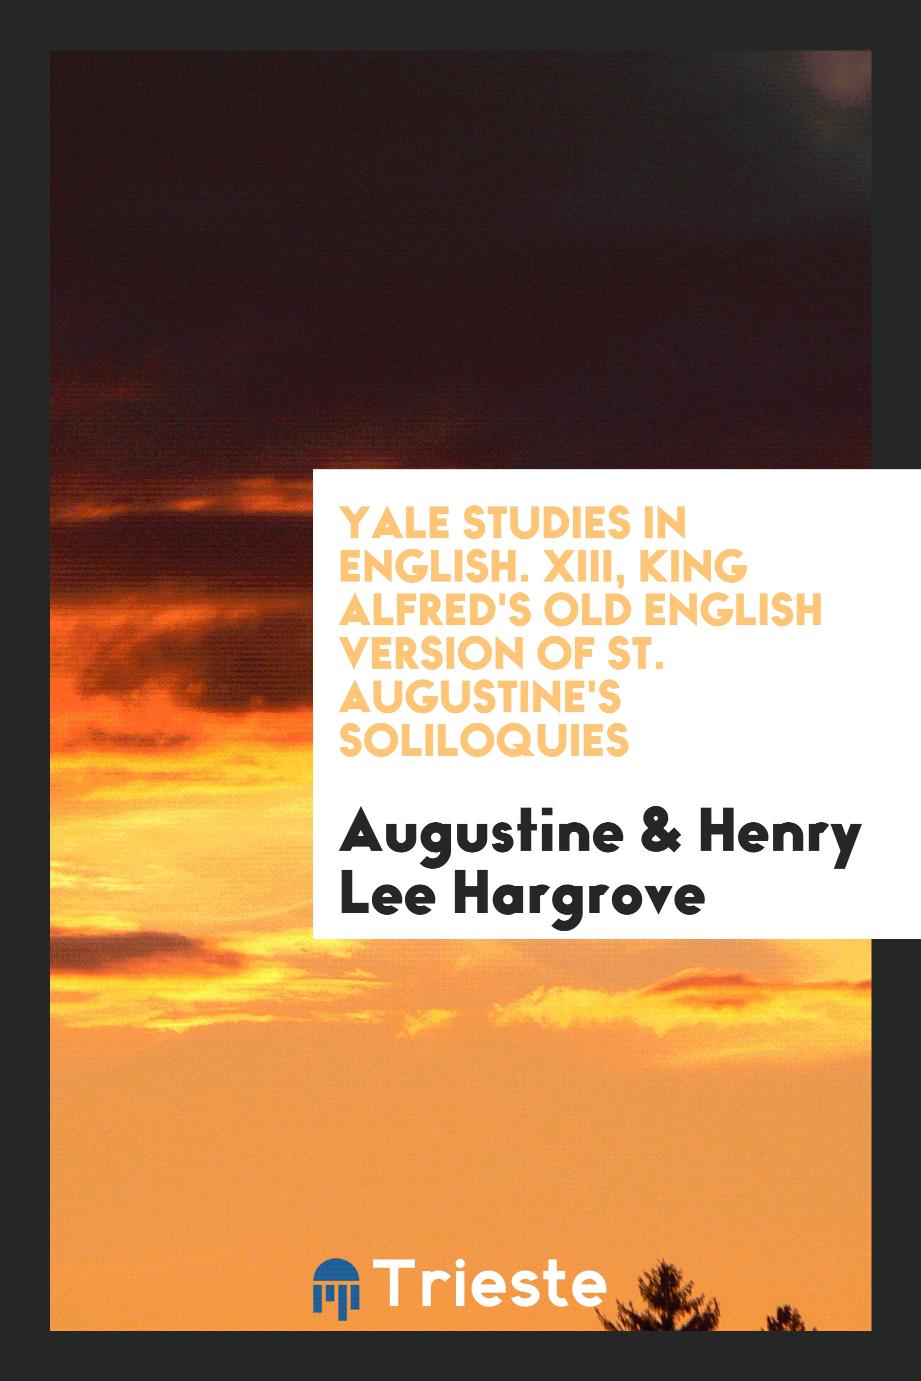 Yale studies in English. XIII, King Alfred's Old English Version of St. Augustine's Soliloquies